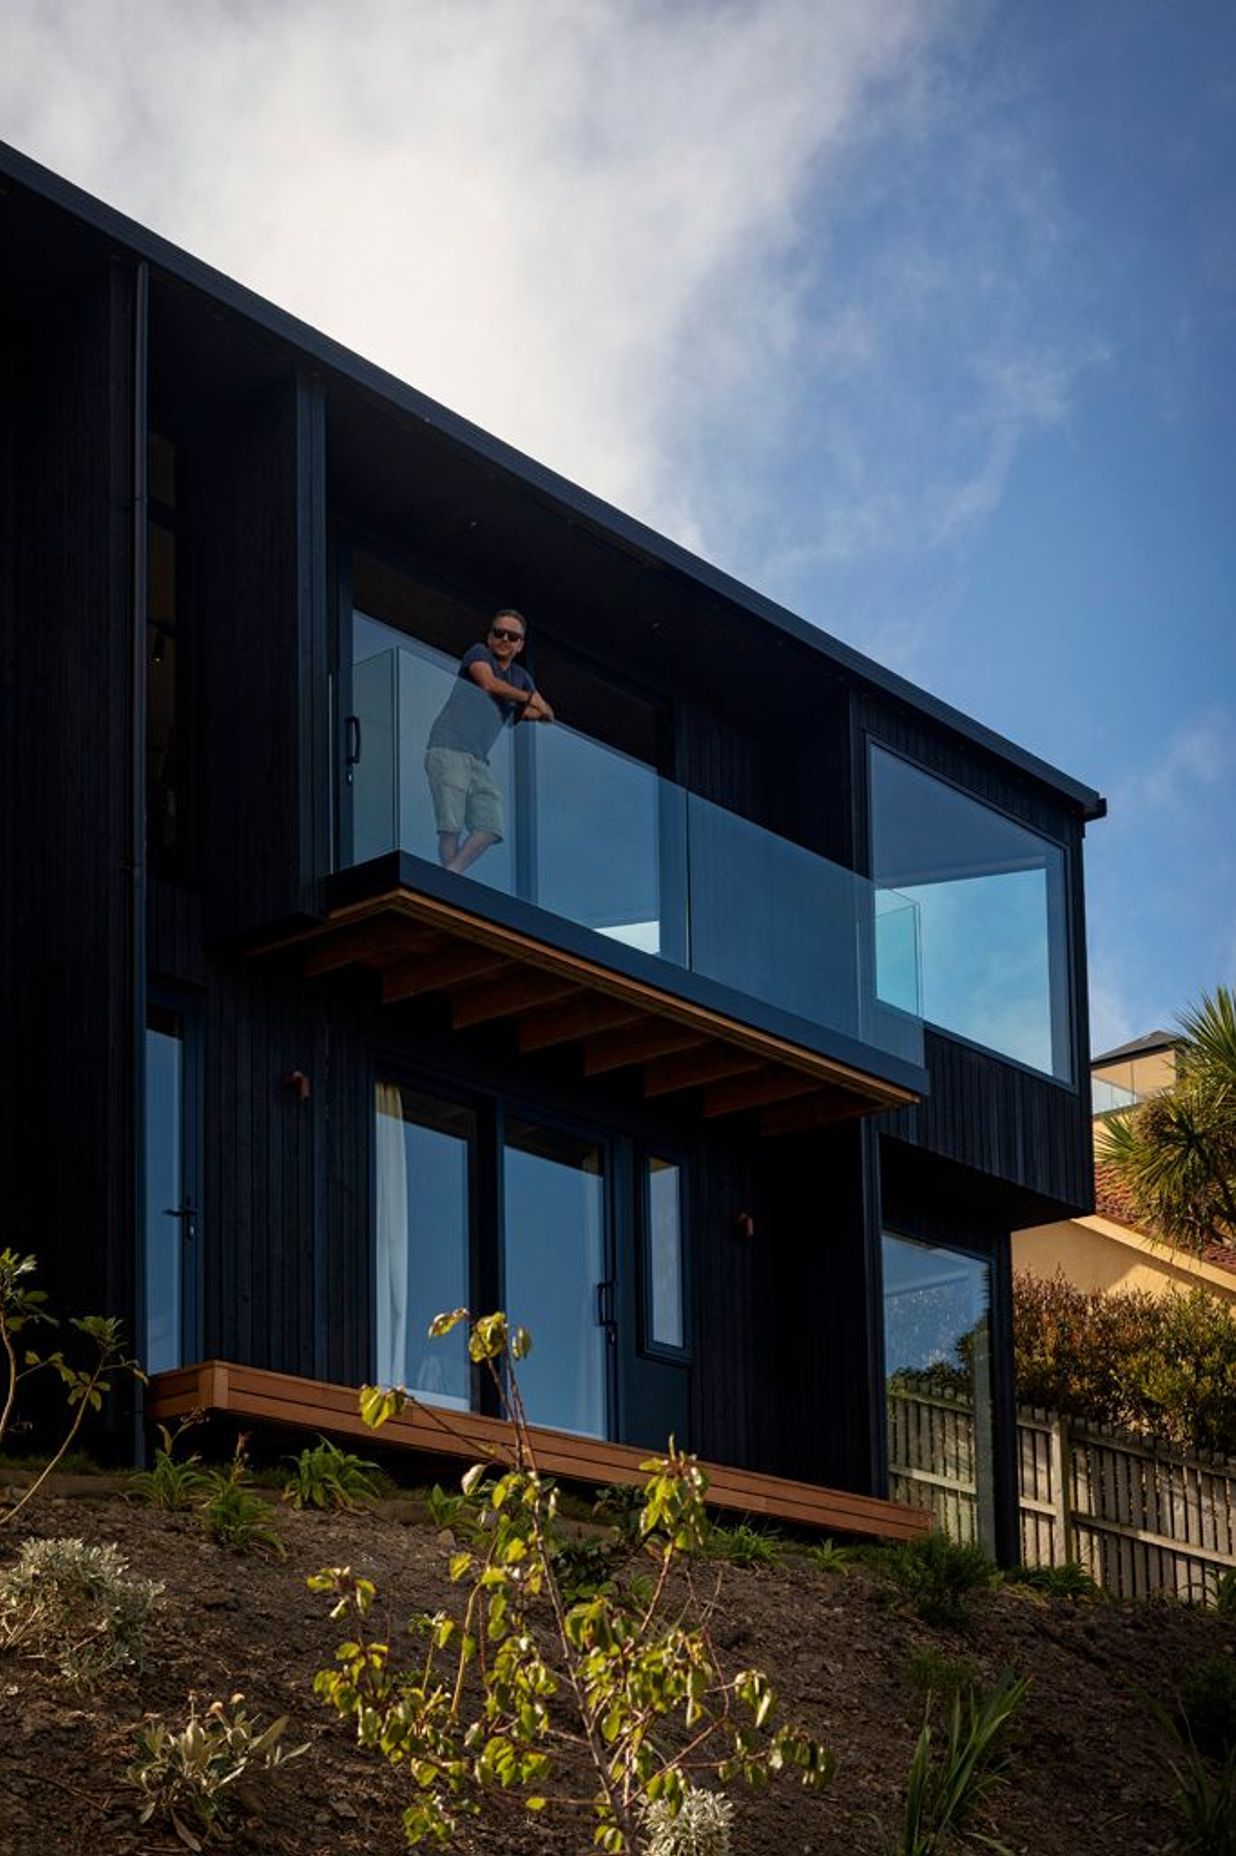 The East-facing facade features large-scale glazing to maximise views out across the bay and adjacent headland.